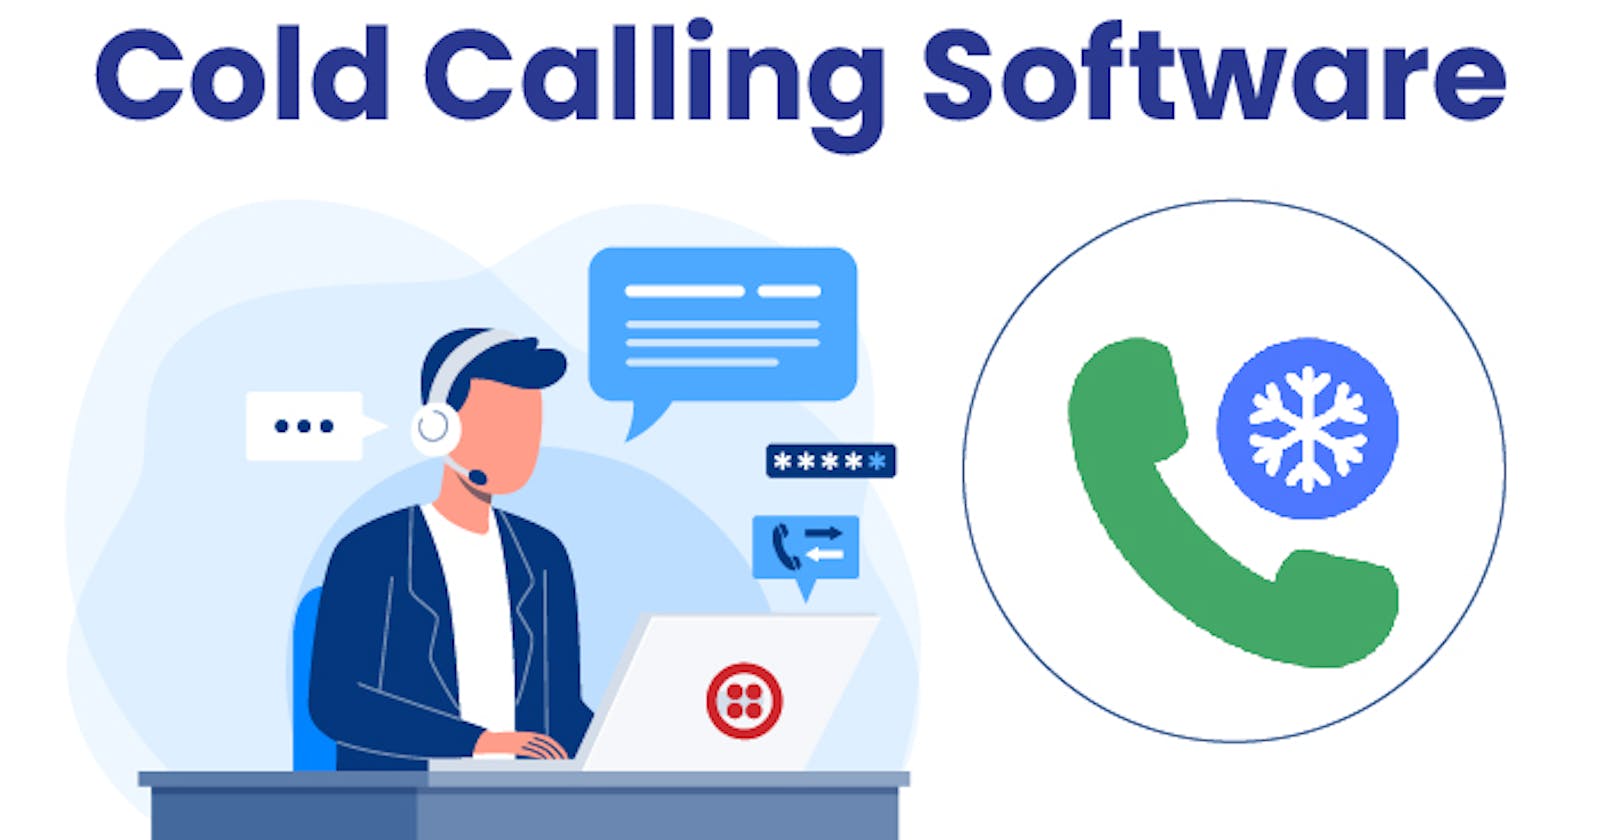 What Are The Benefits of Cold Calling Software